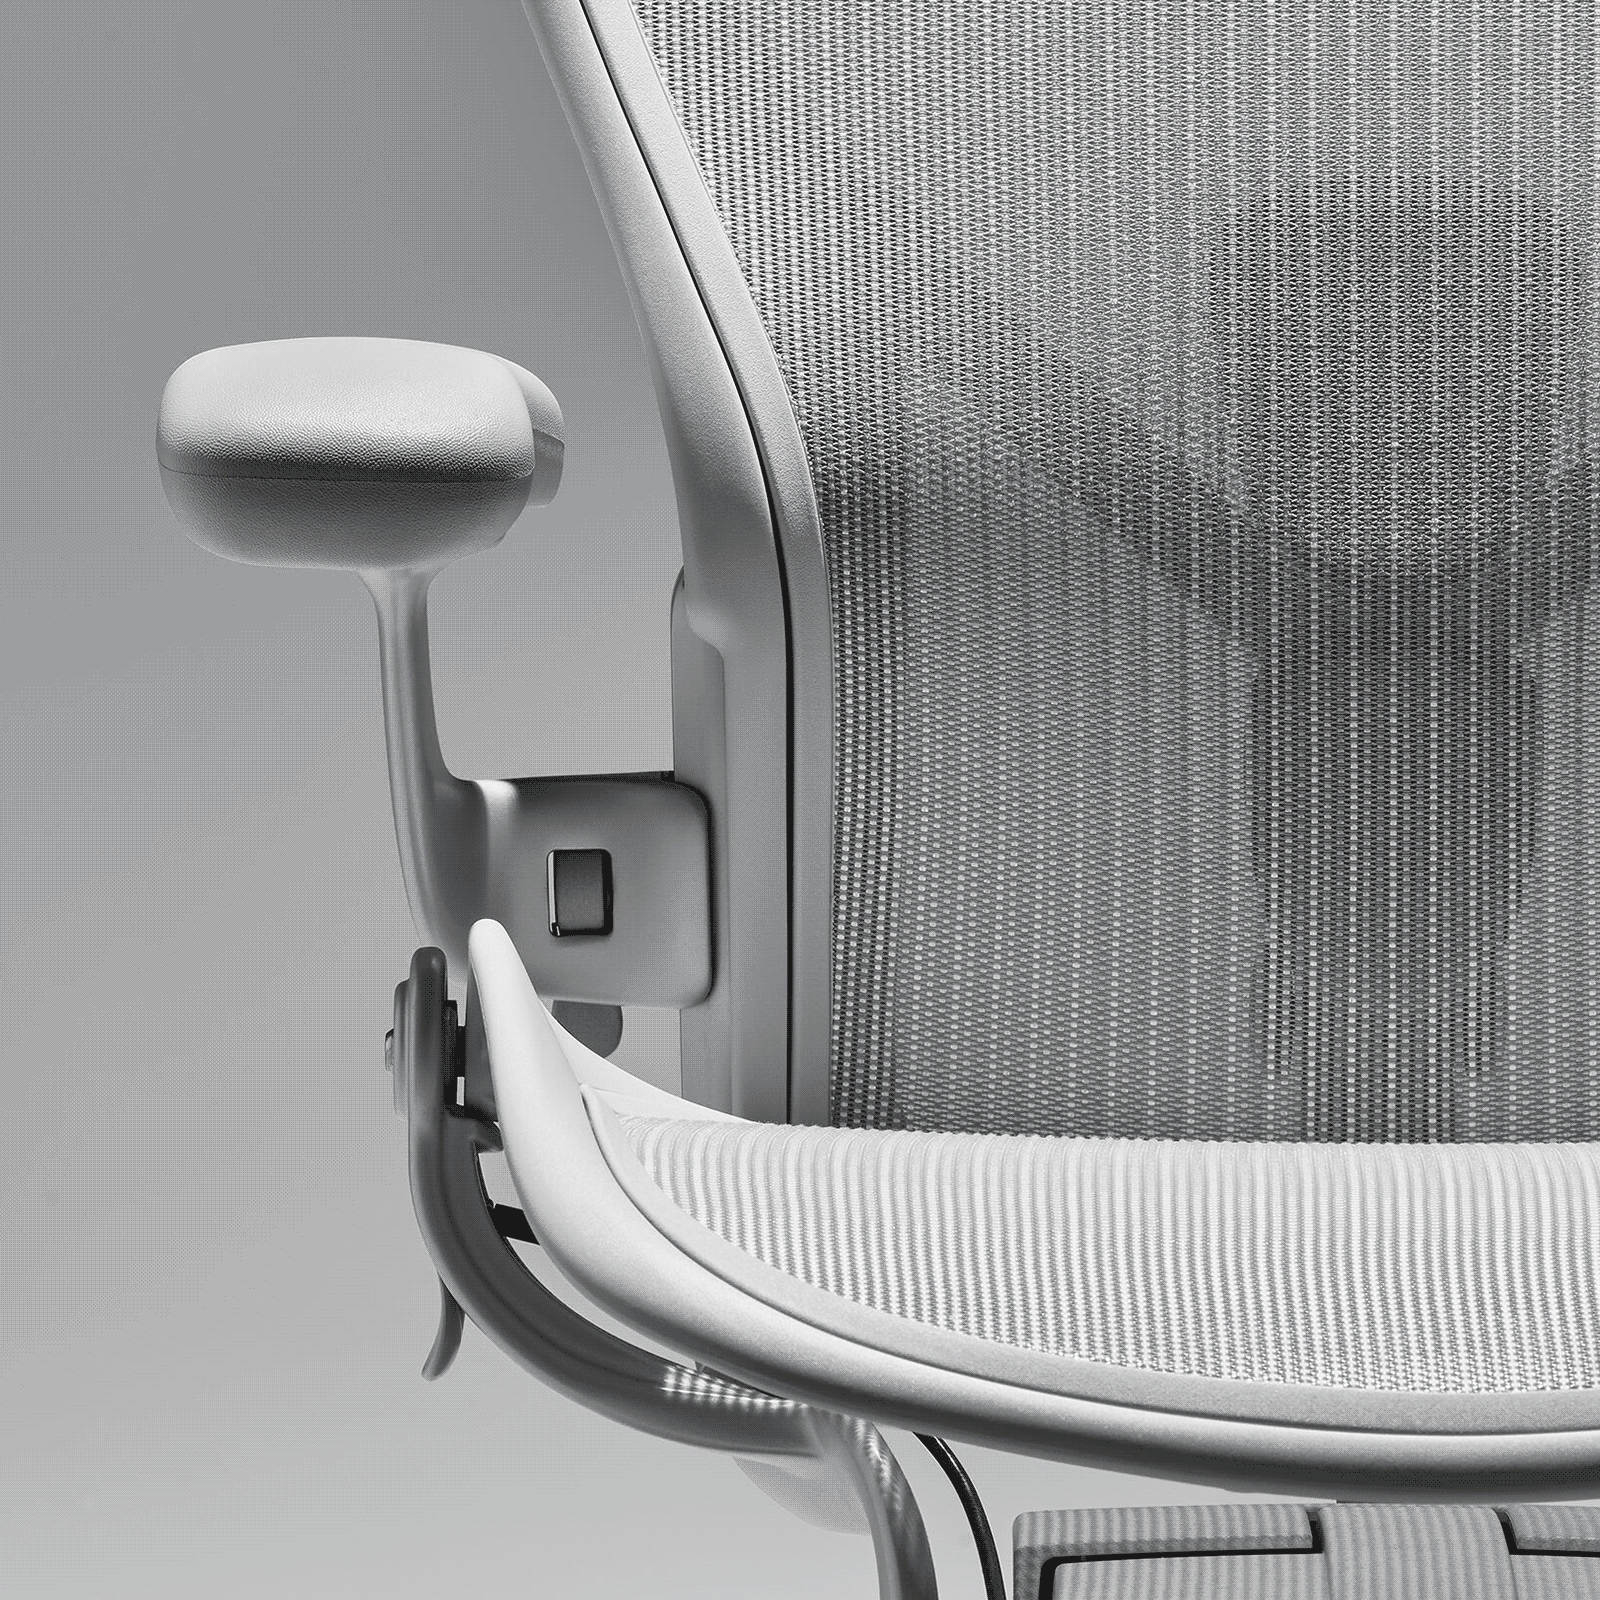 An animation showing the four different material expressions of the Aeron Chair.